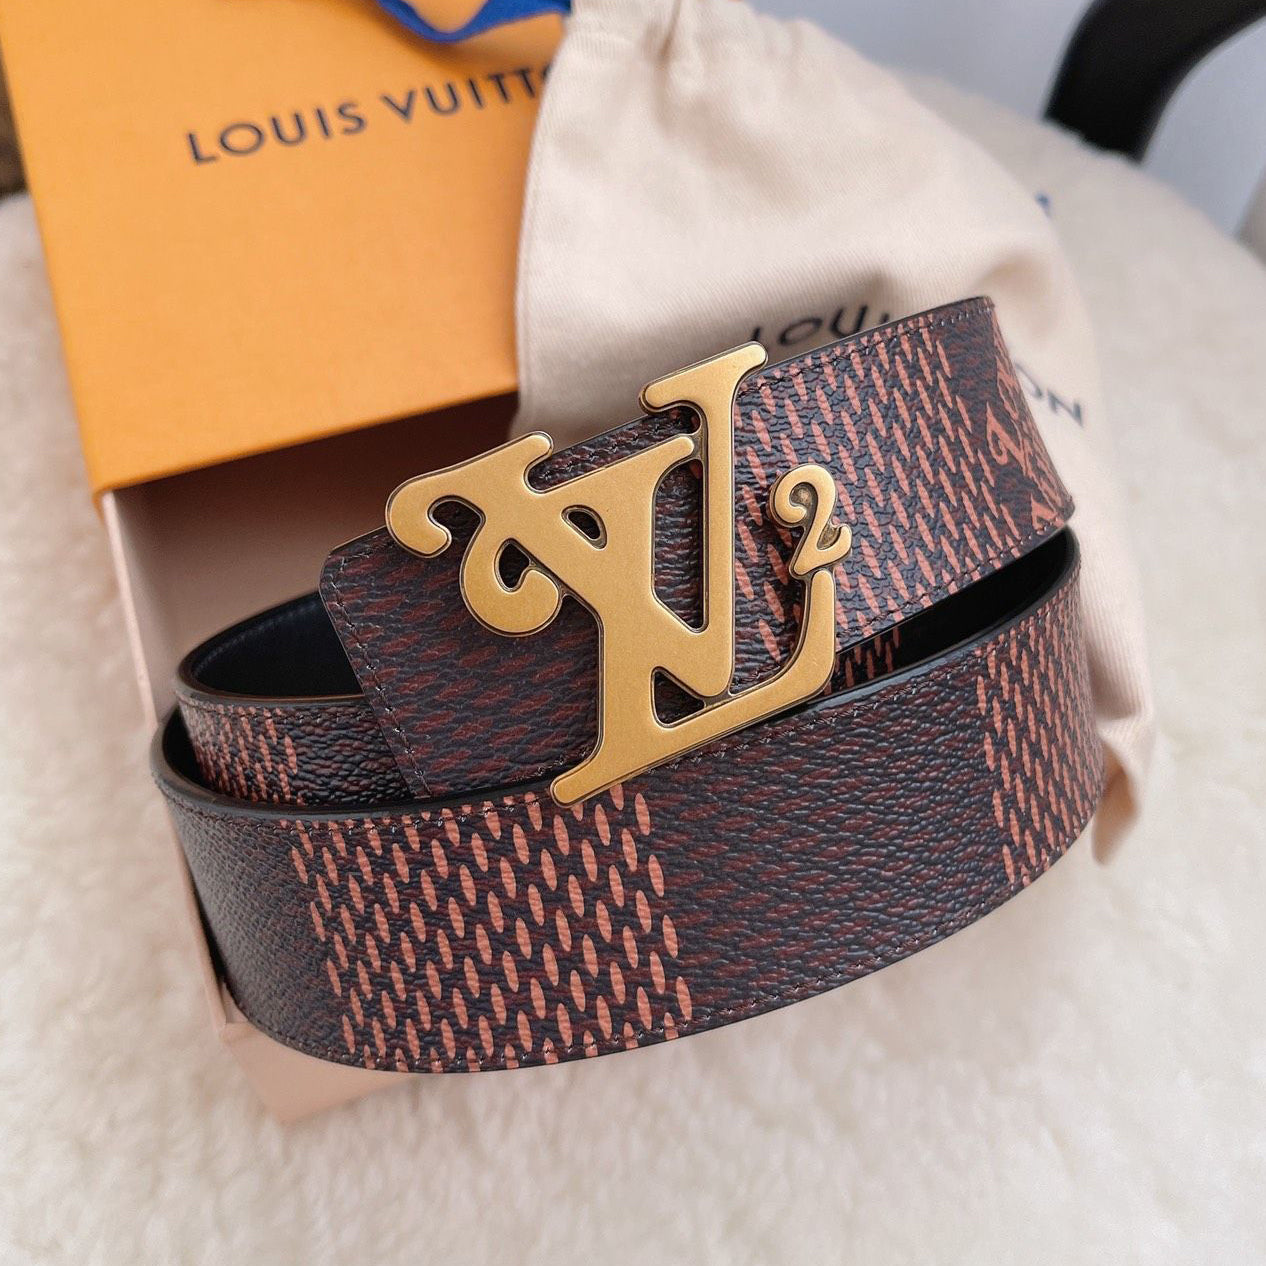 LV Louis Vuitton Classic Leather Smooth Buckle Belt